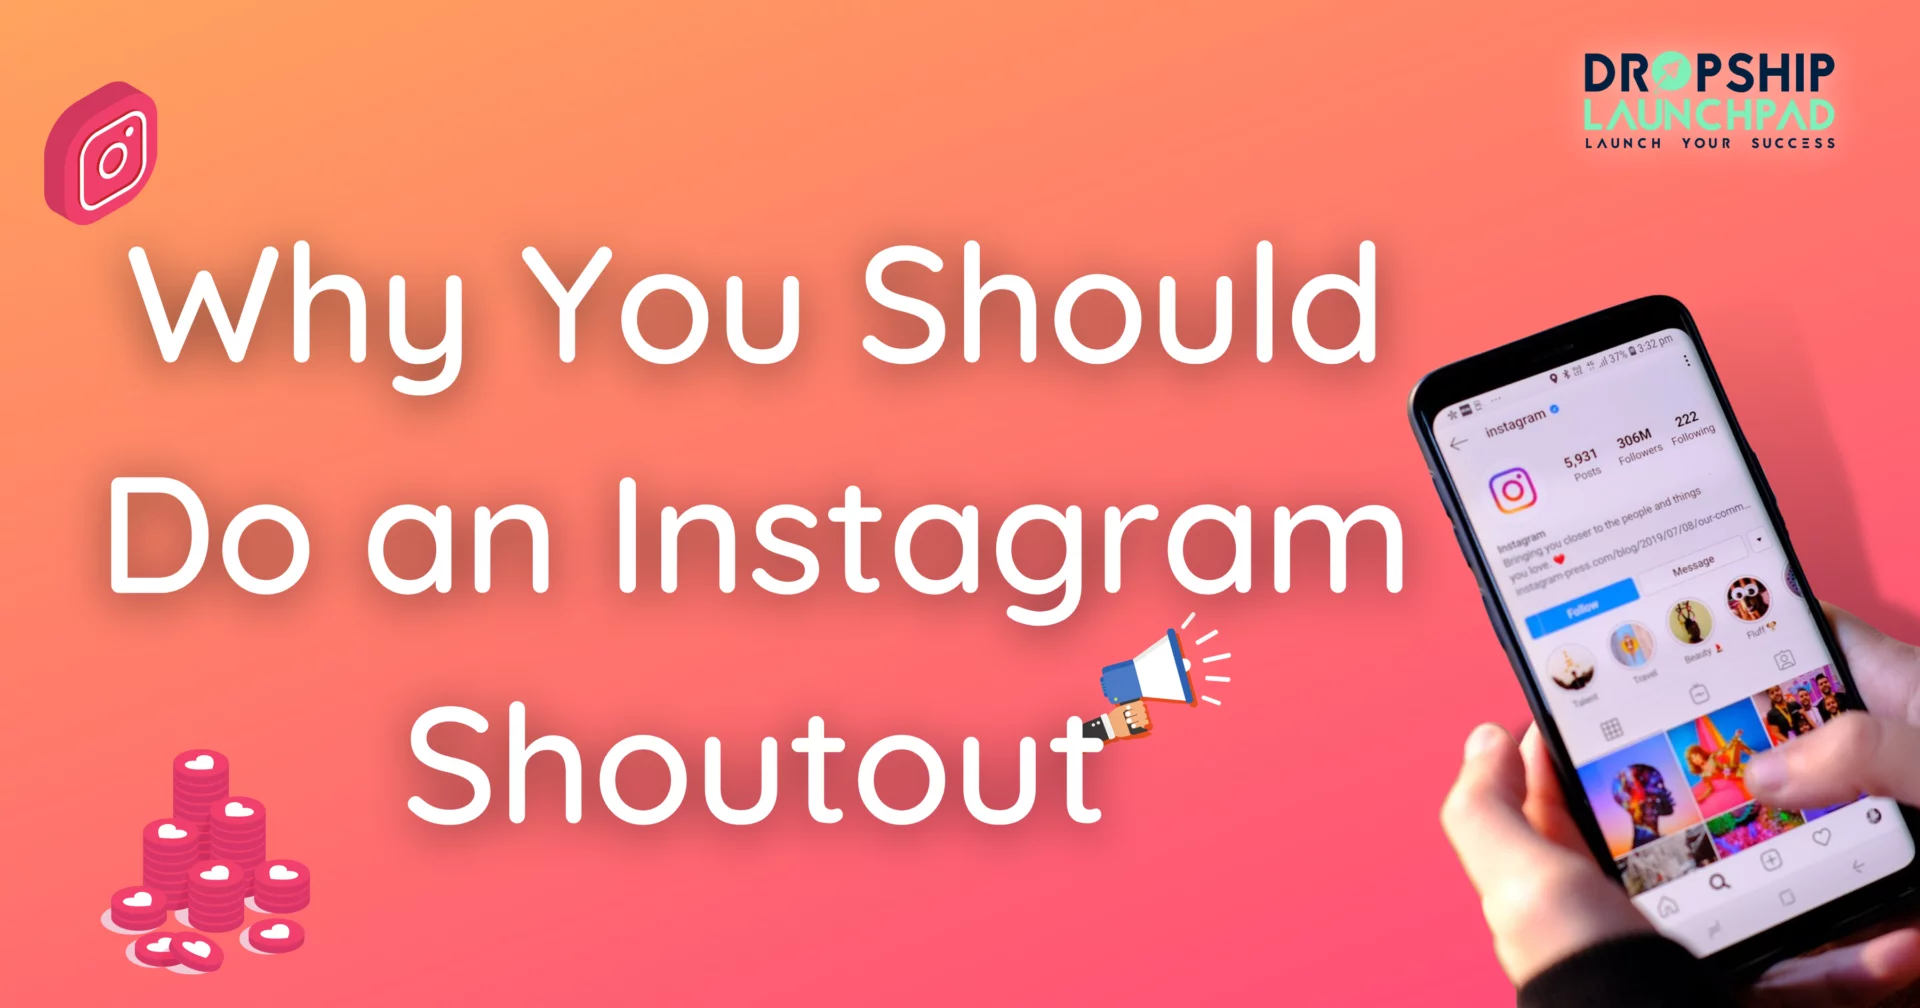 Why you should do an Instagram shoutout